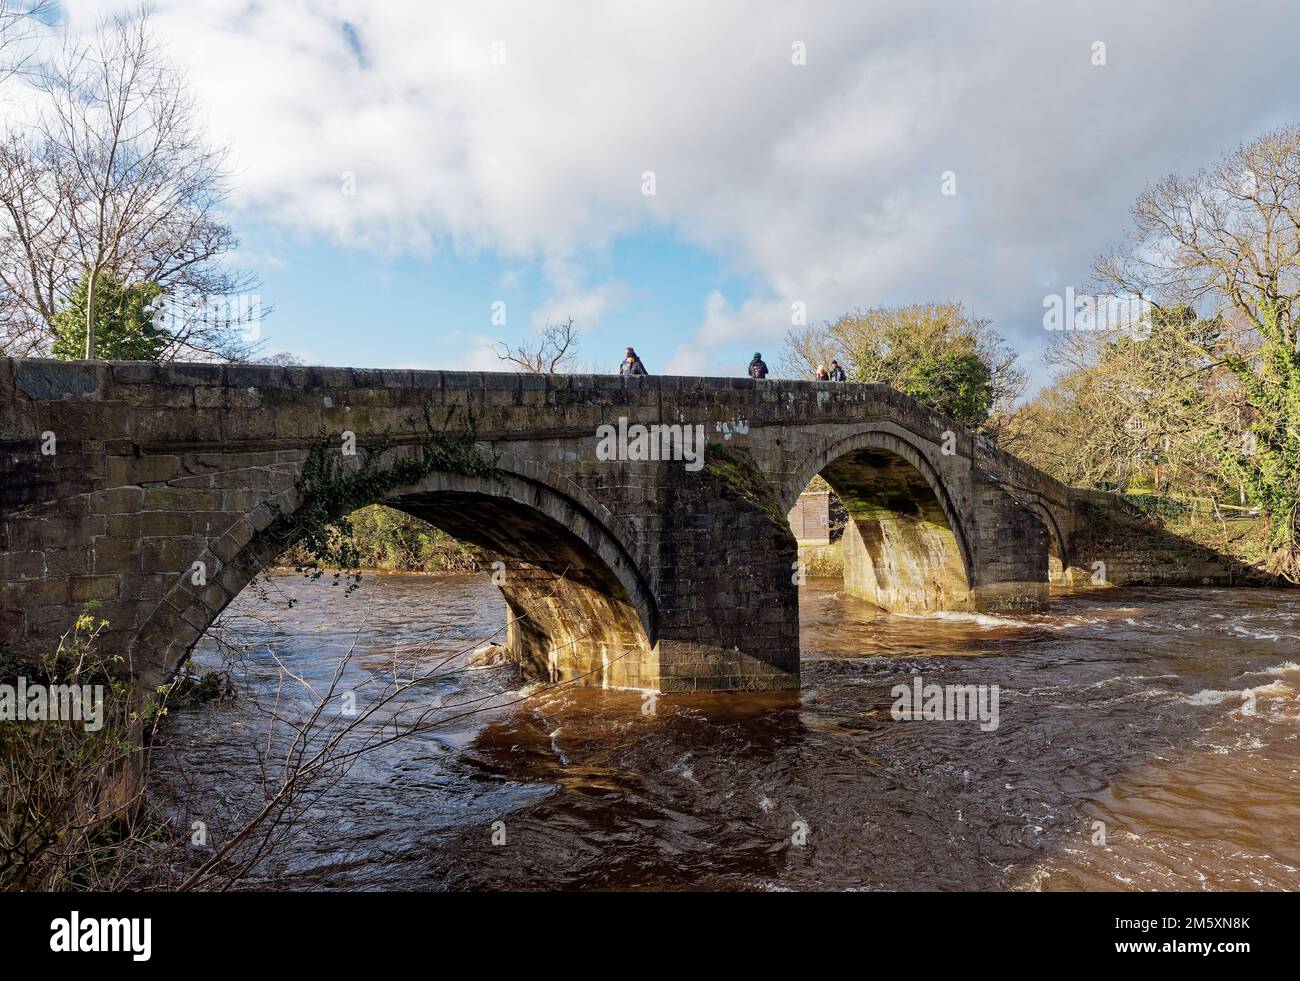 The old Stone Footbridge crowing the River Wharfe at Ilkley in West Yorkshire on a sunny cold day in March, with Walkers crossing it on the Dales way. Stock Photo